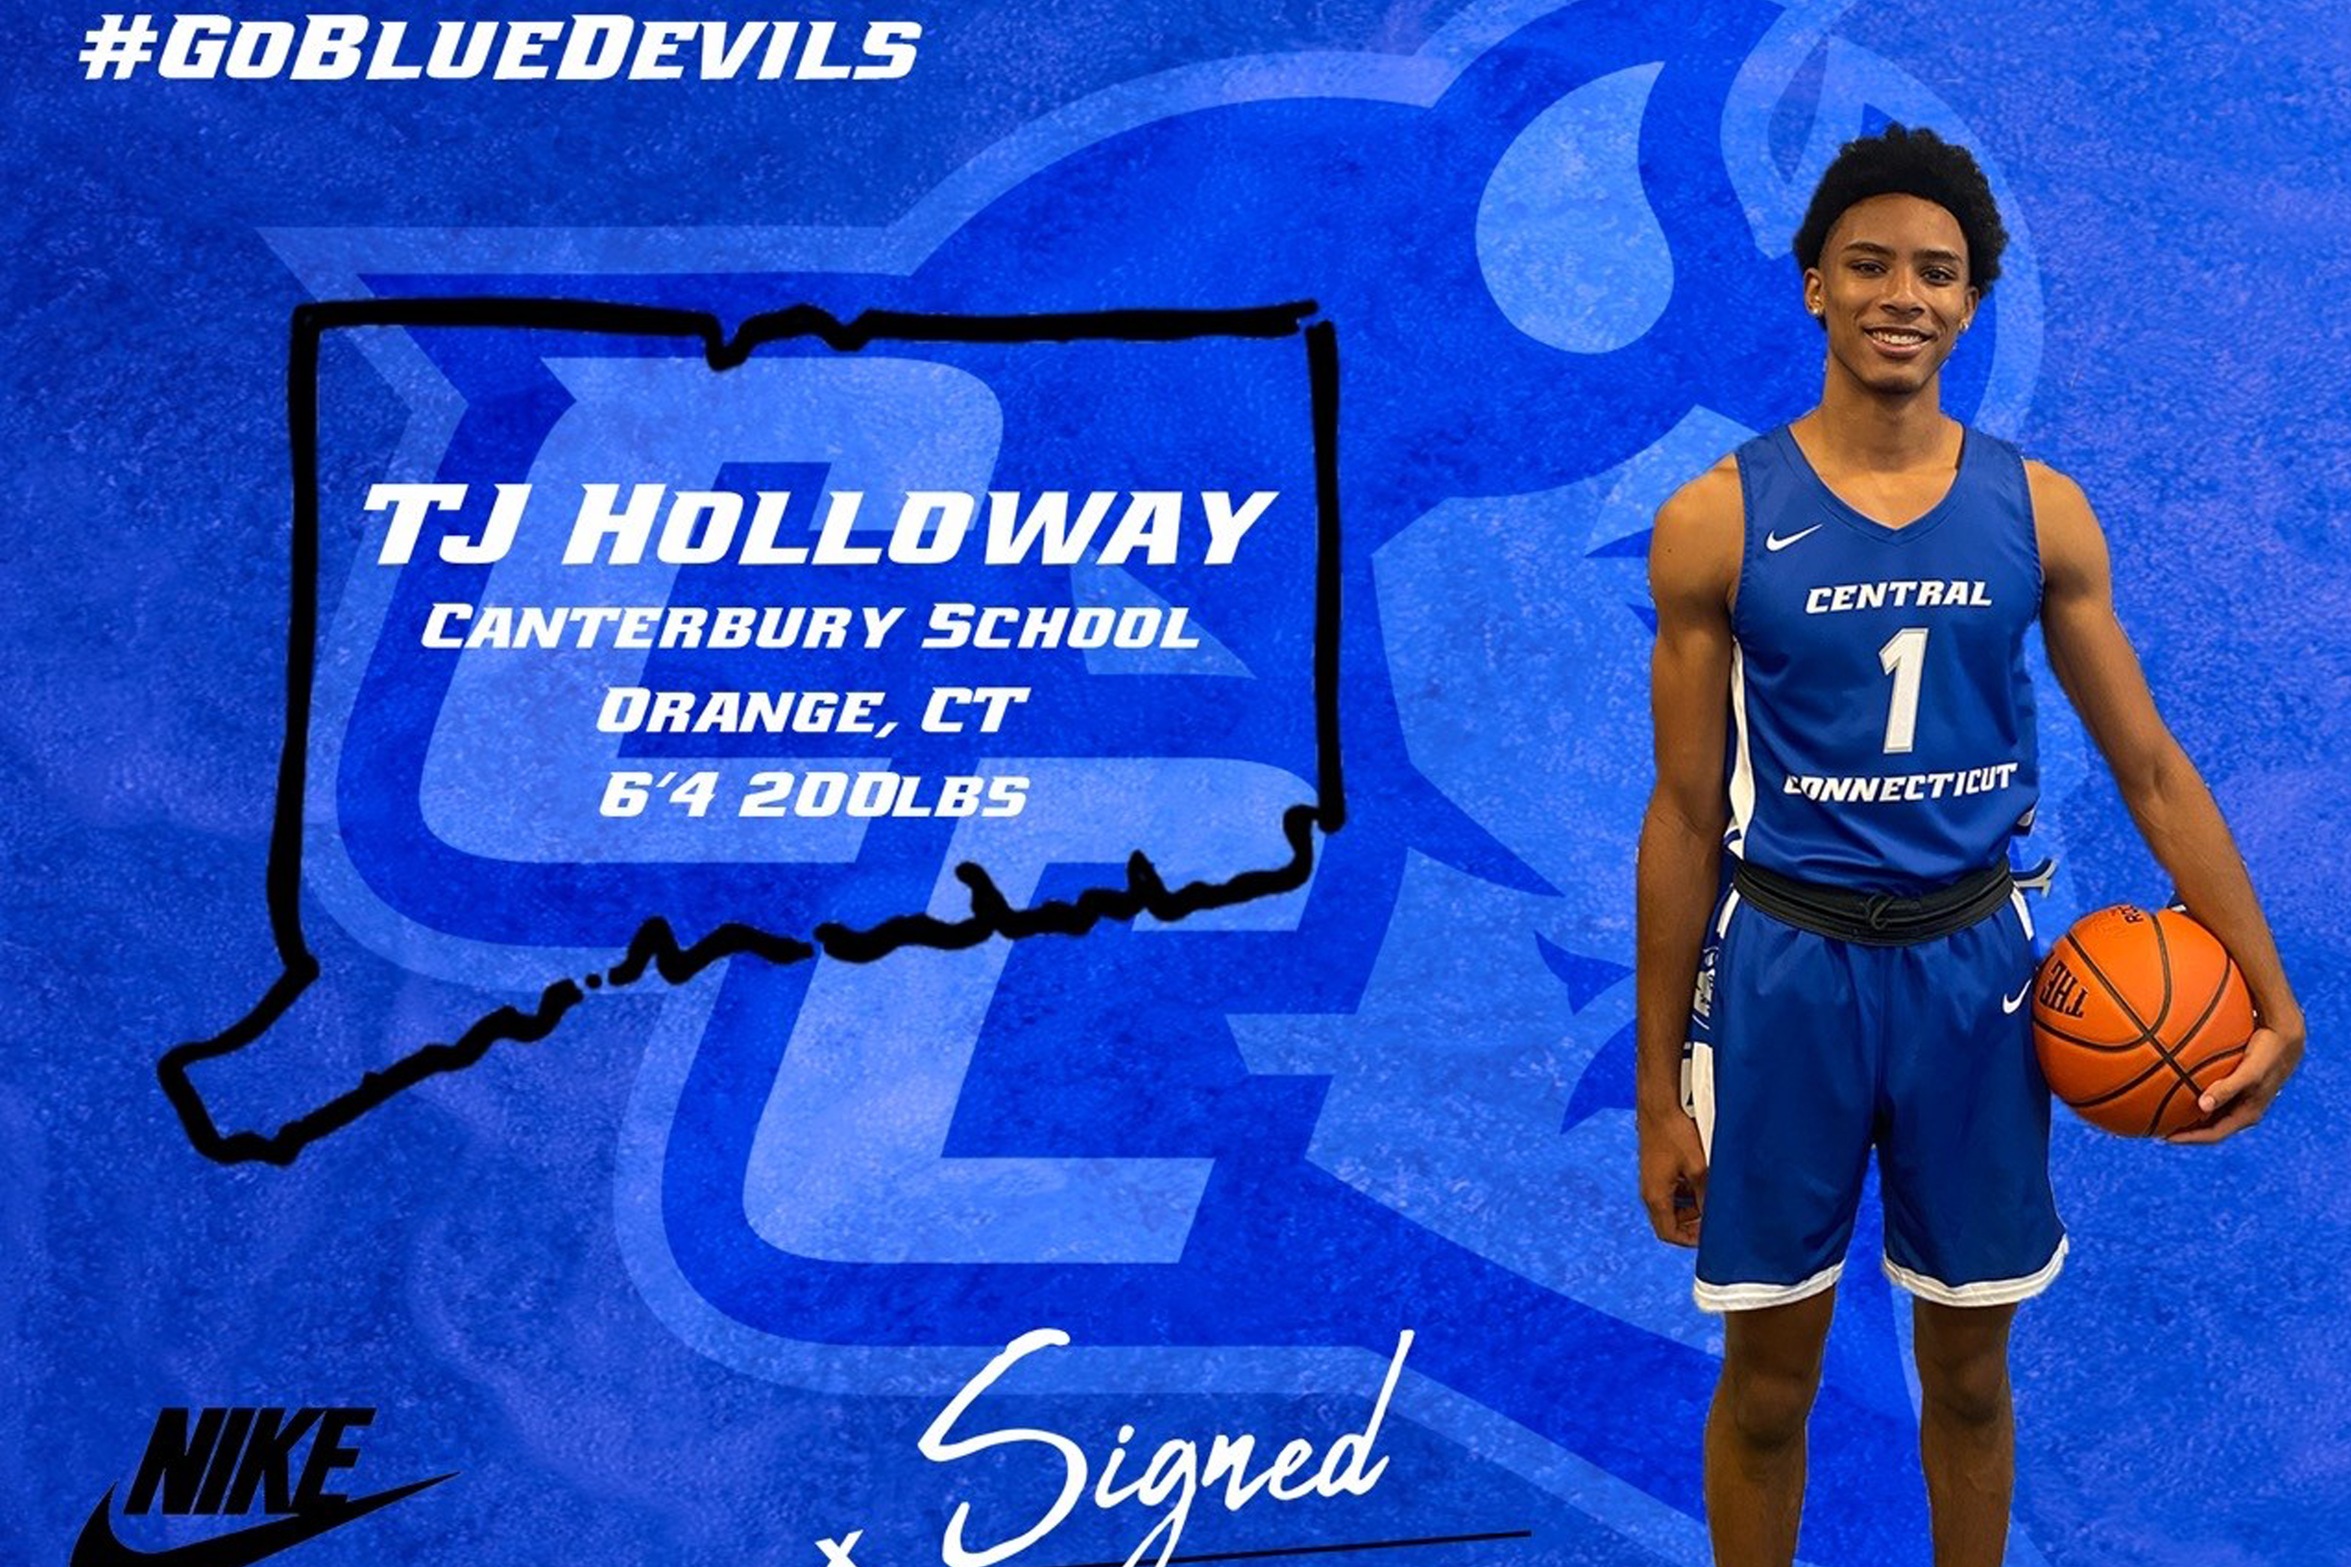 Men's Basketball Announces Signing of TJ Holloway